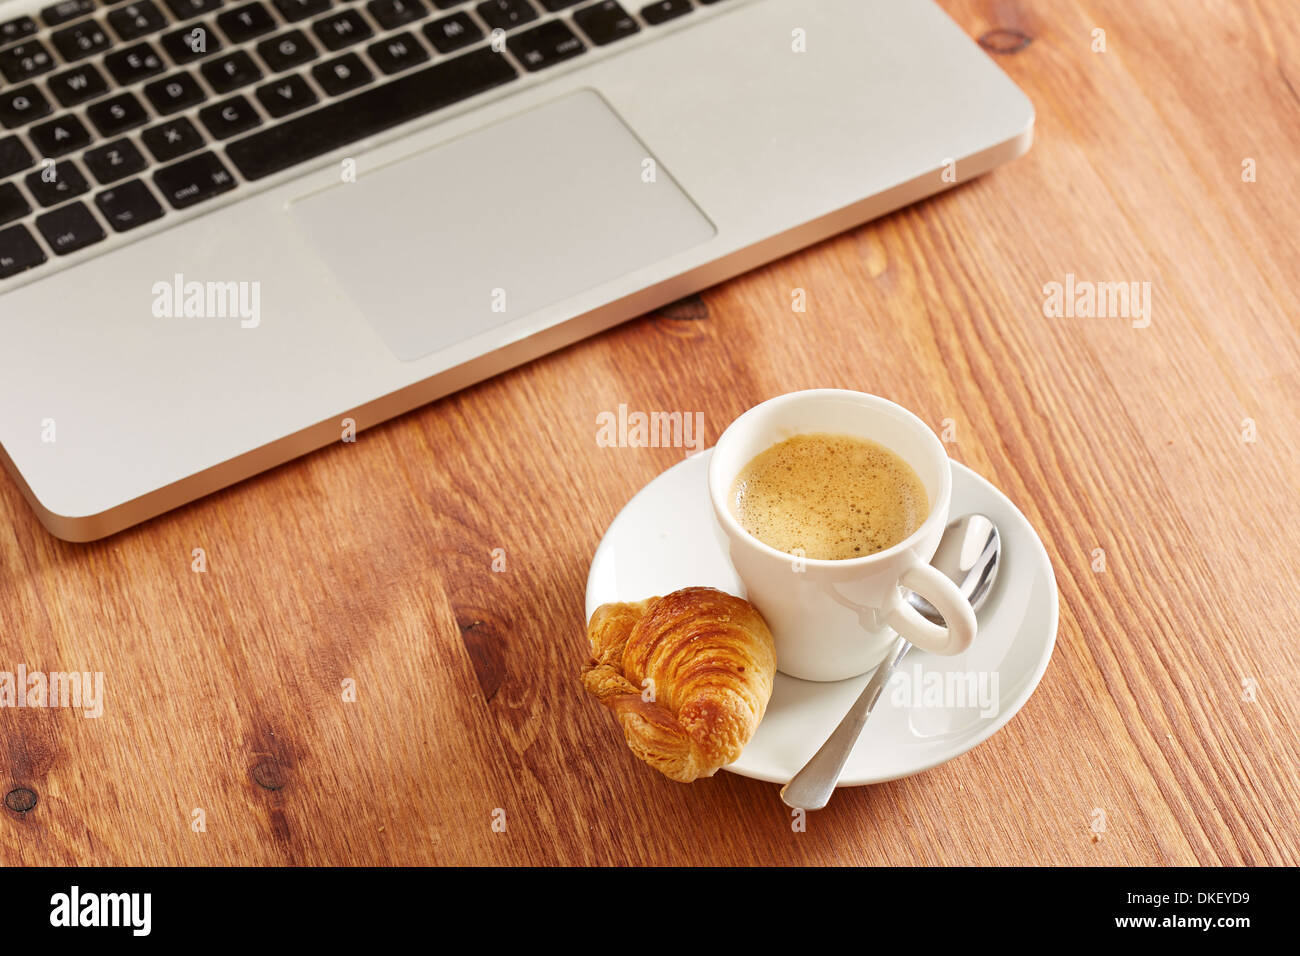 Having breakfast in front of computer on workspace Stock Photo